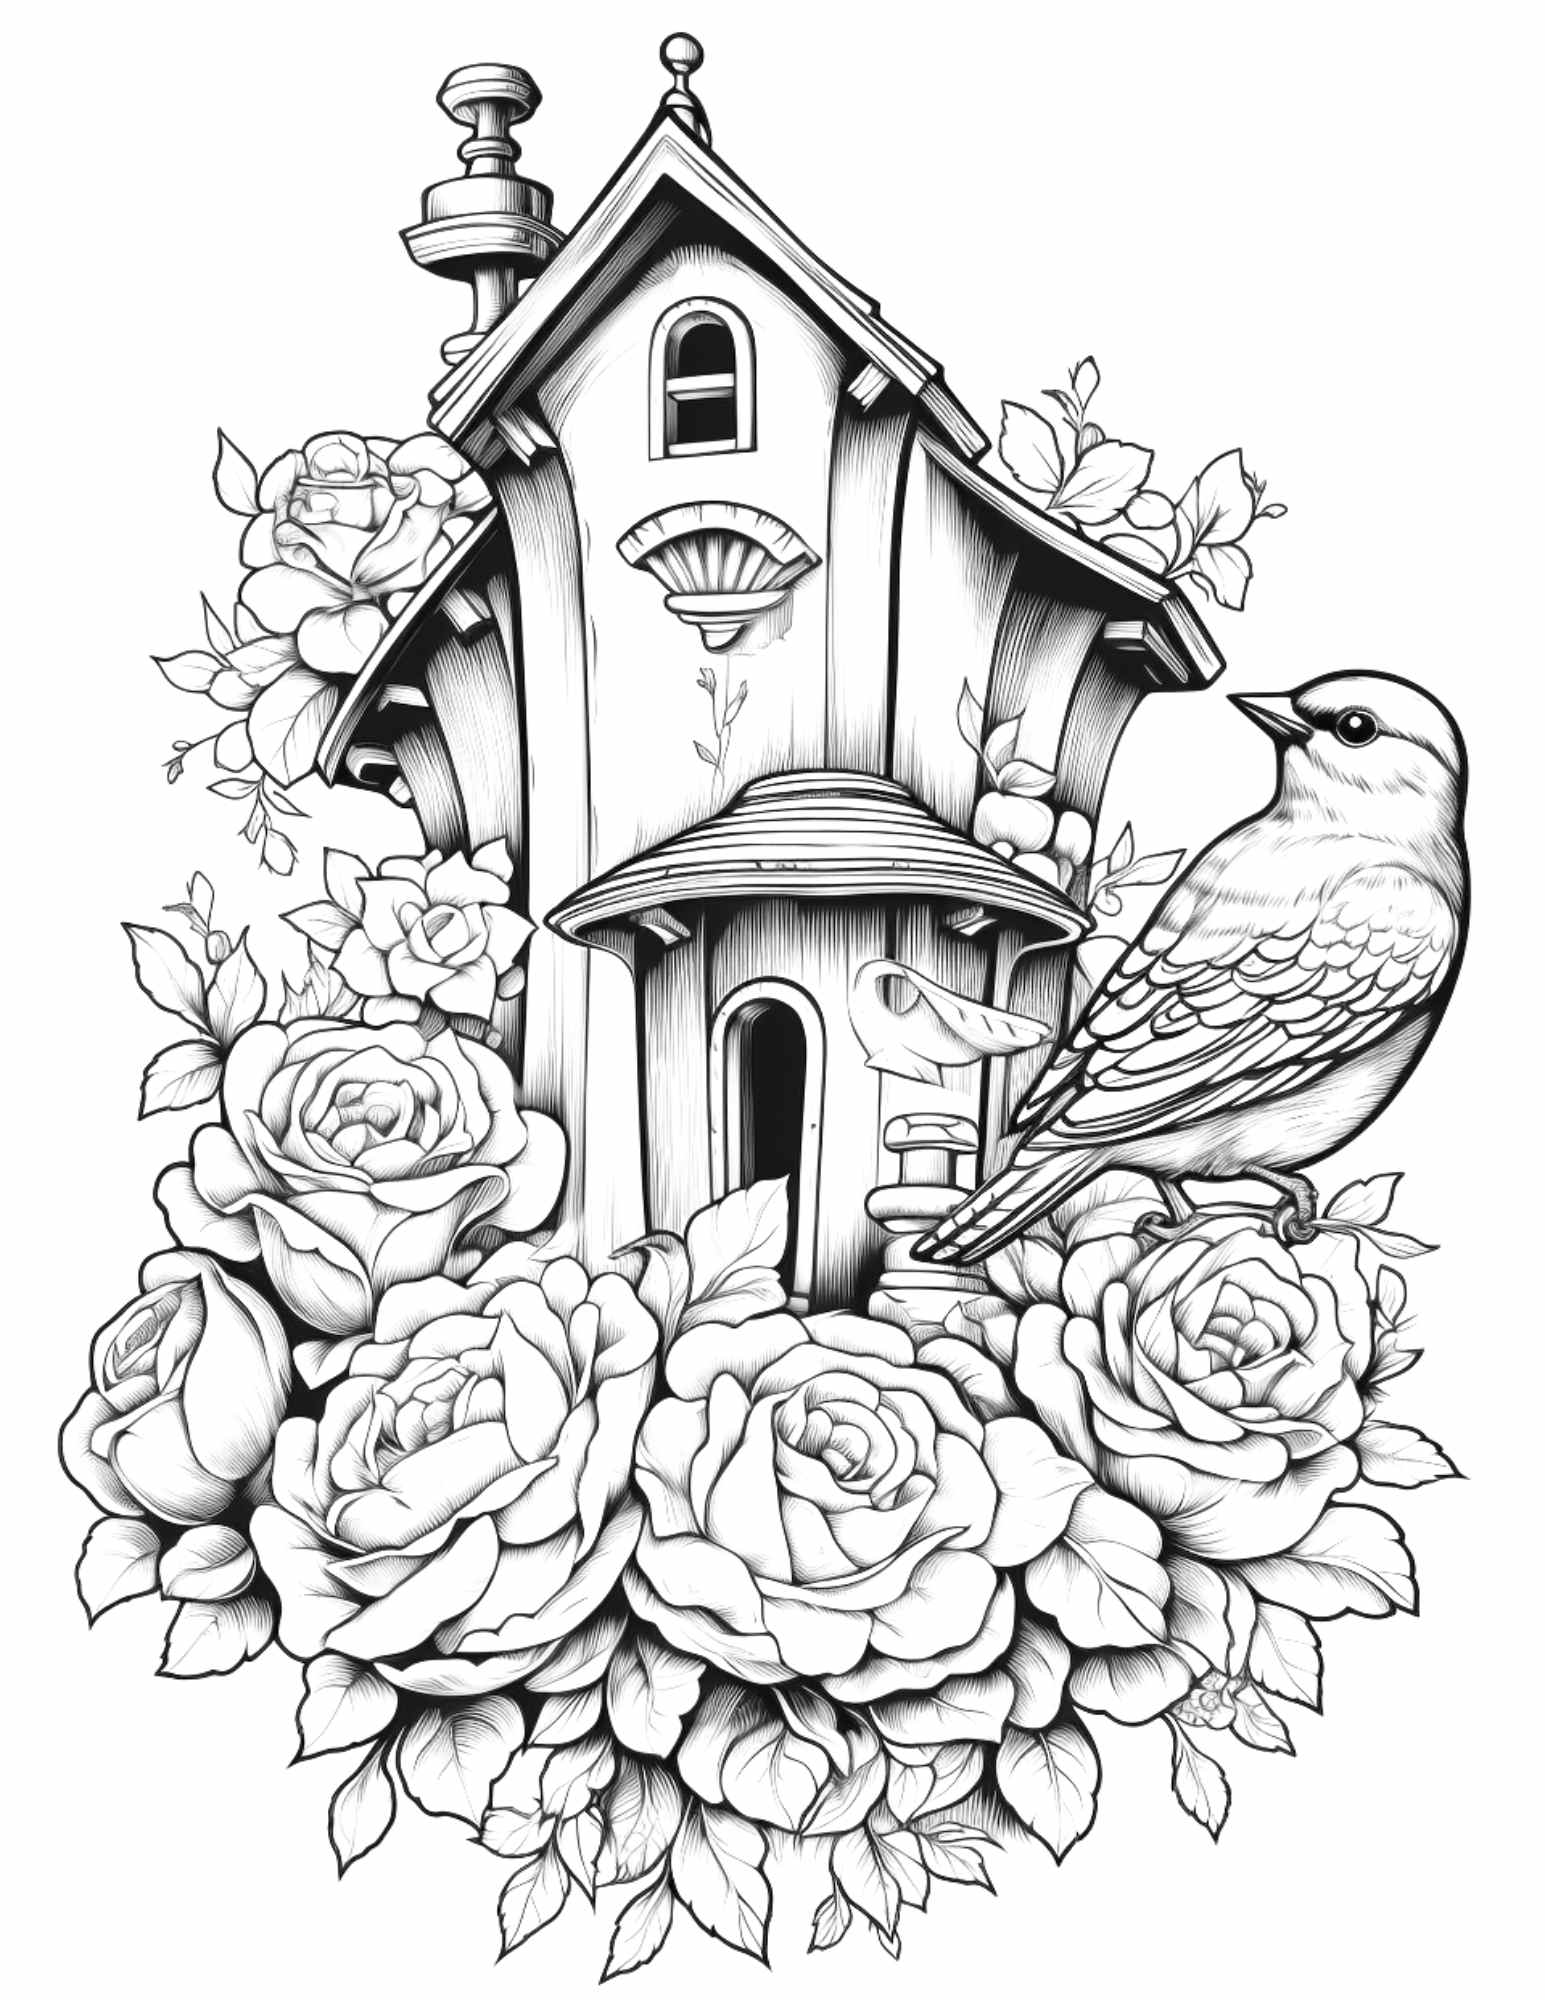 Free flower bird house grayscale coloring pages printable for adults â coloring